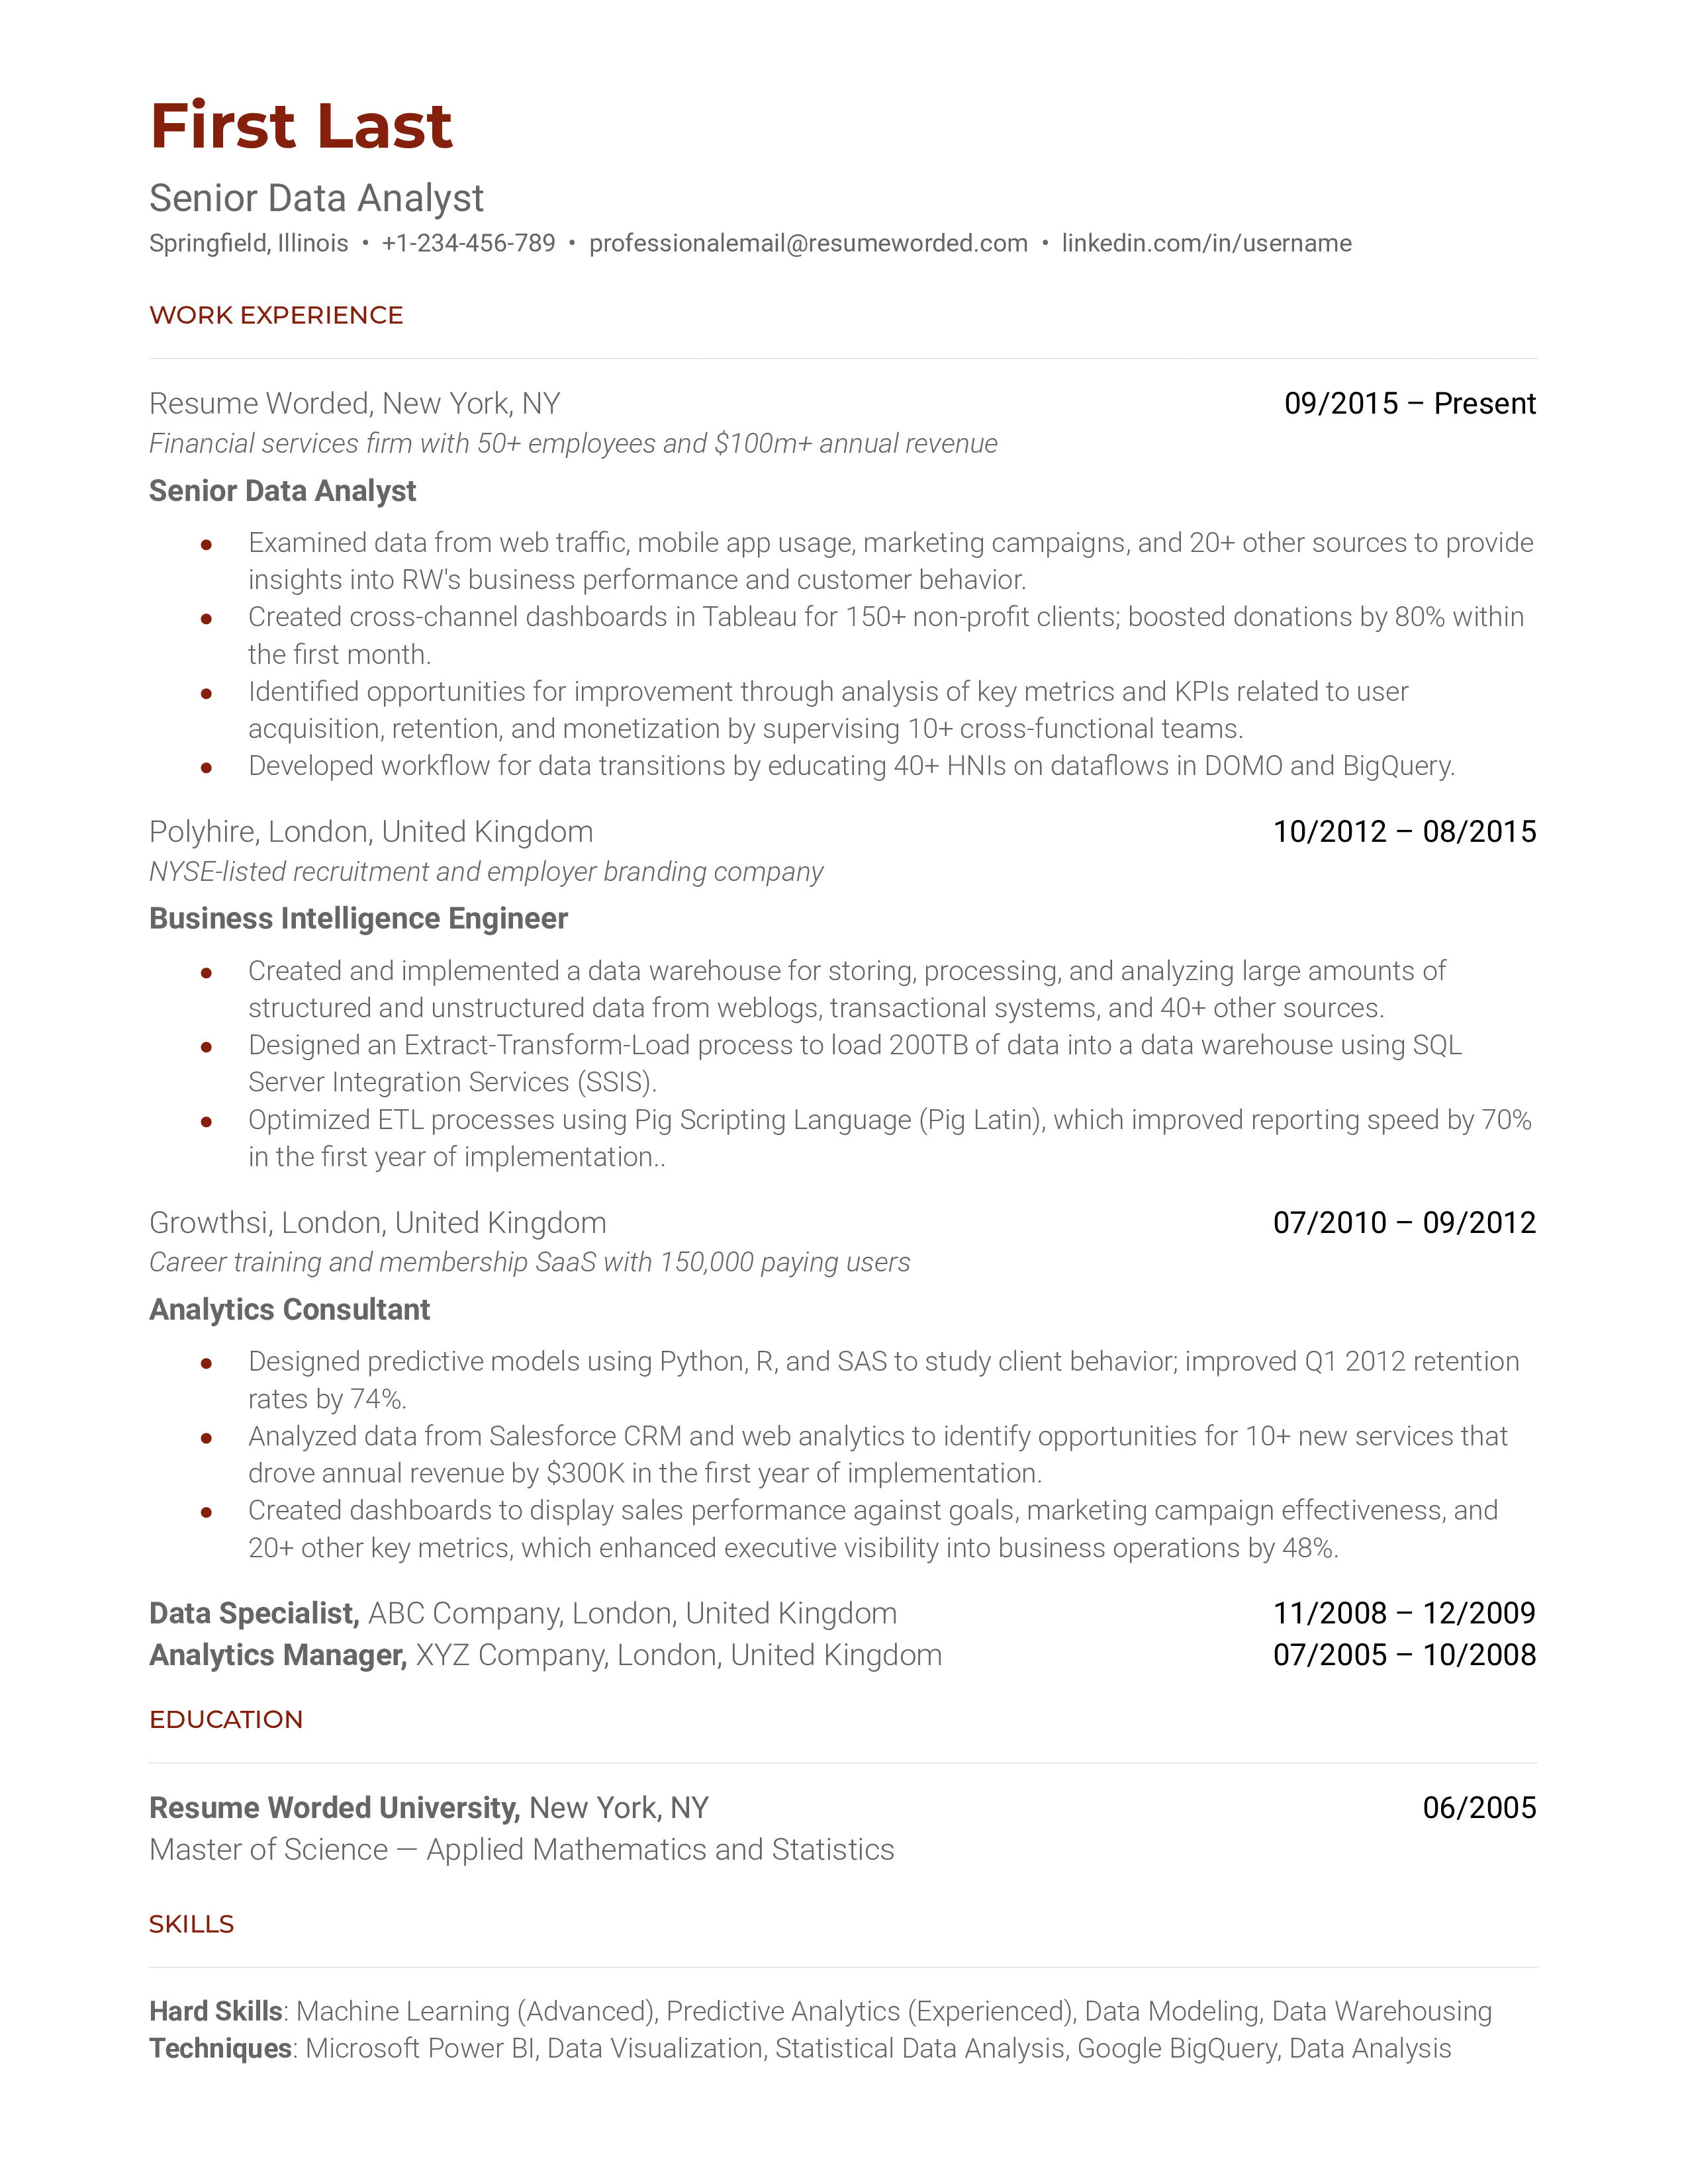 A CV for a Senior Data Analyst highlighting analytical, visualization and machine learning skills.